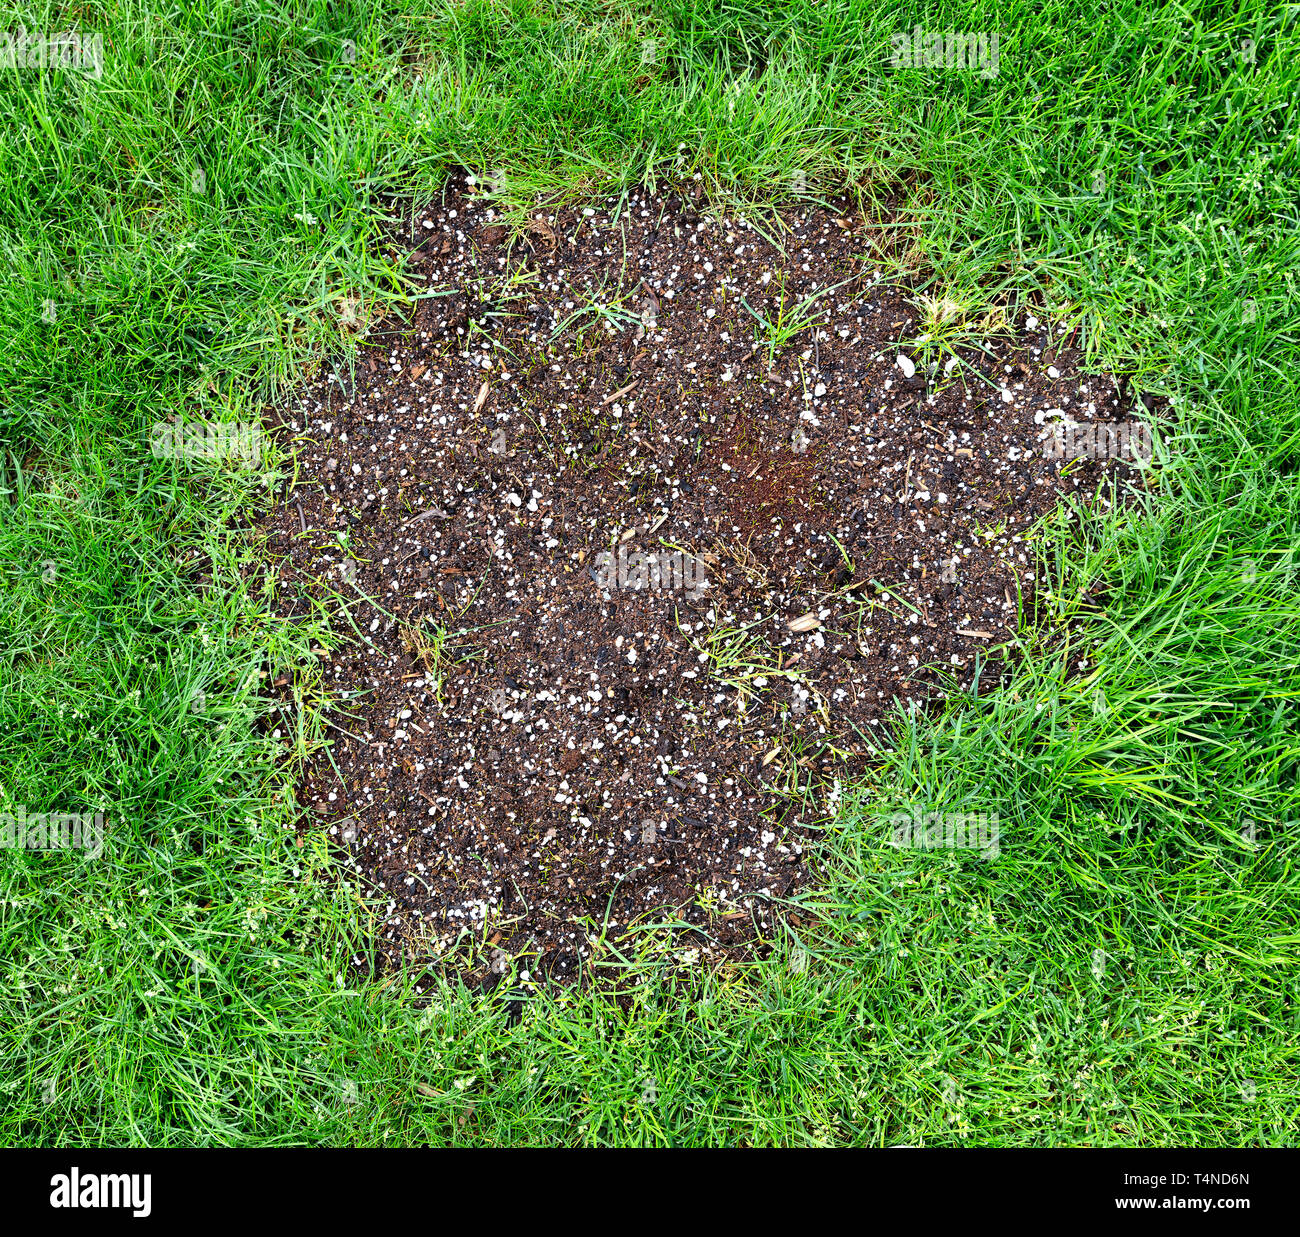 Repair patch on natural grass with morning dew Stock Photo